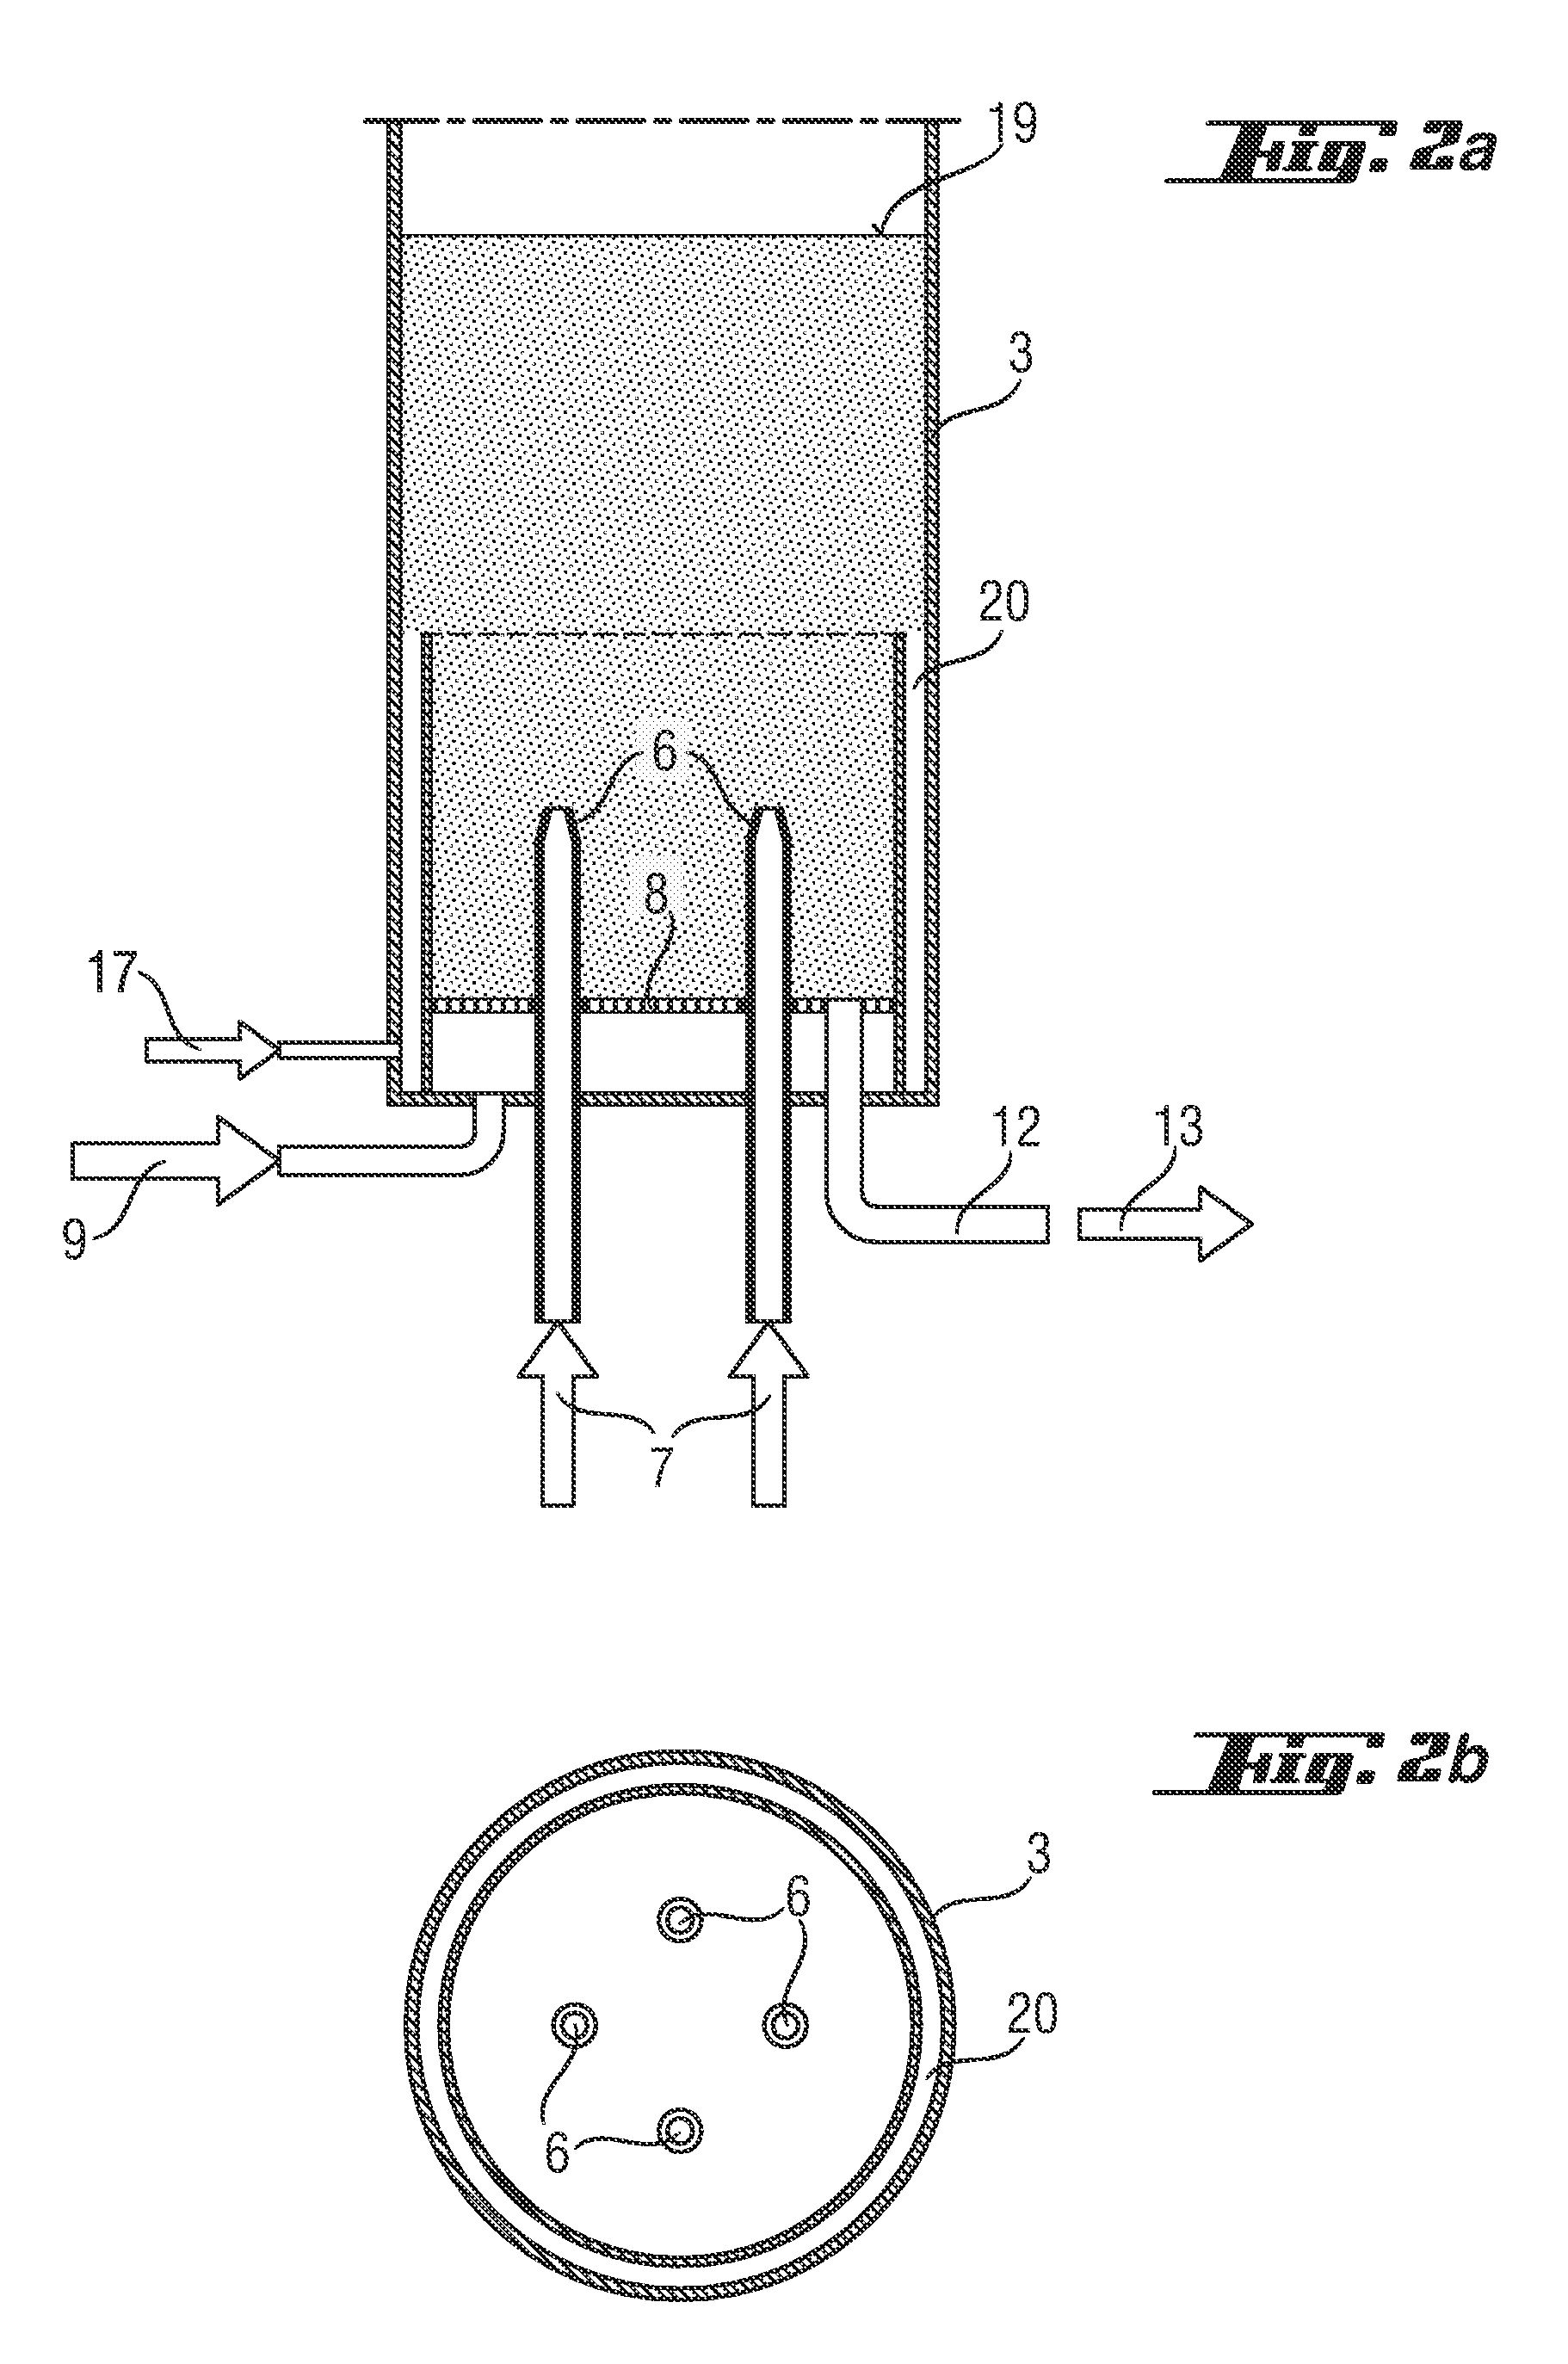 Method and device for producing granulated polycrystalline silicon in a fluidized bed reactor